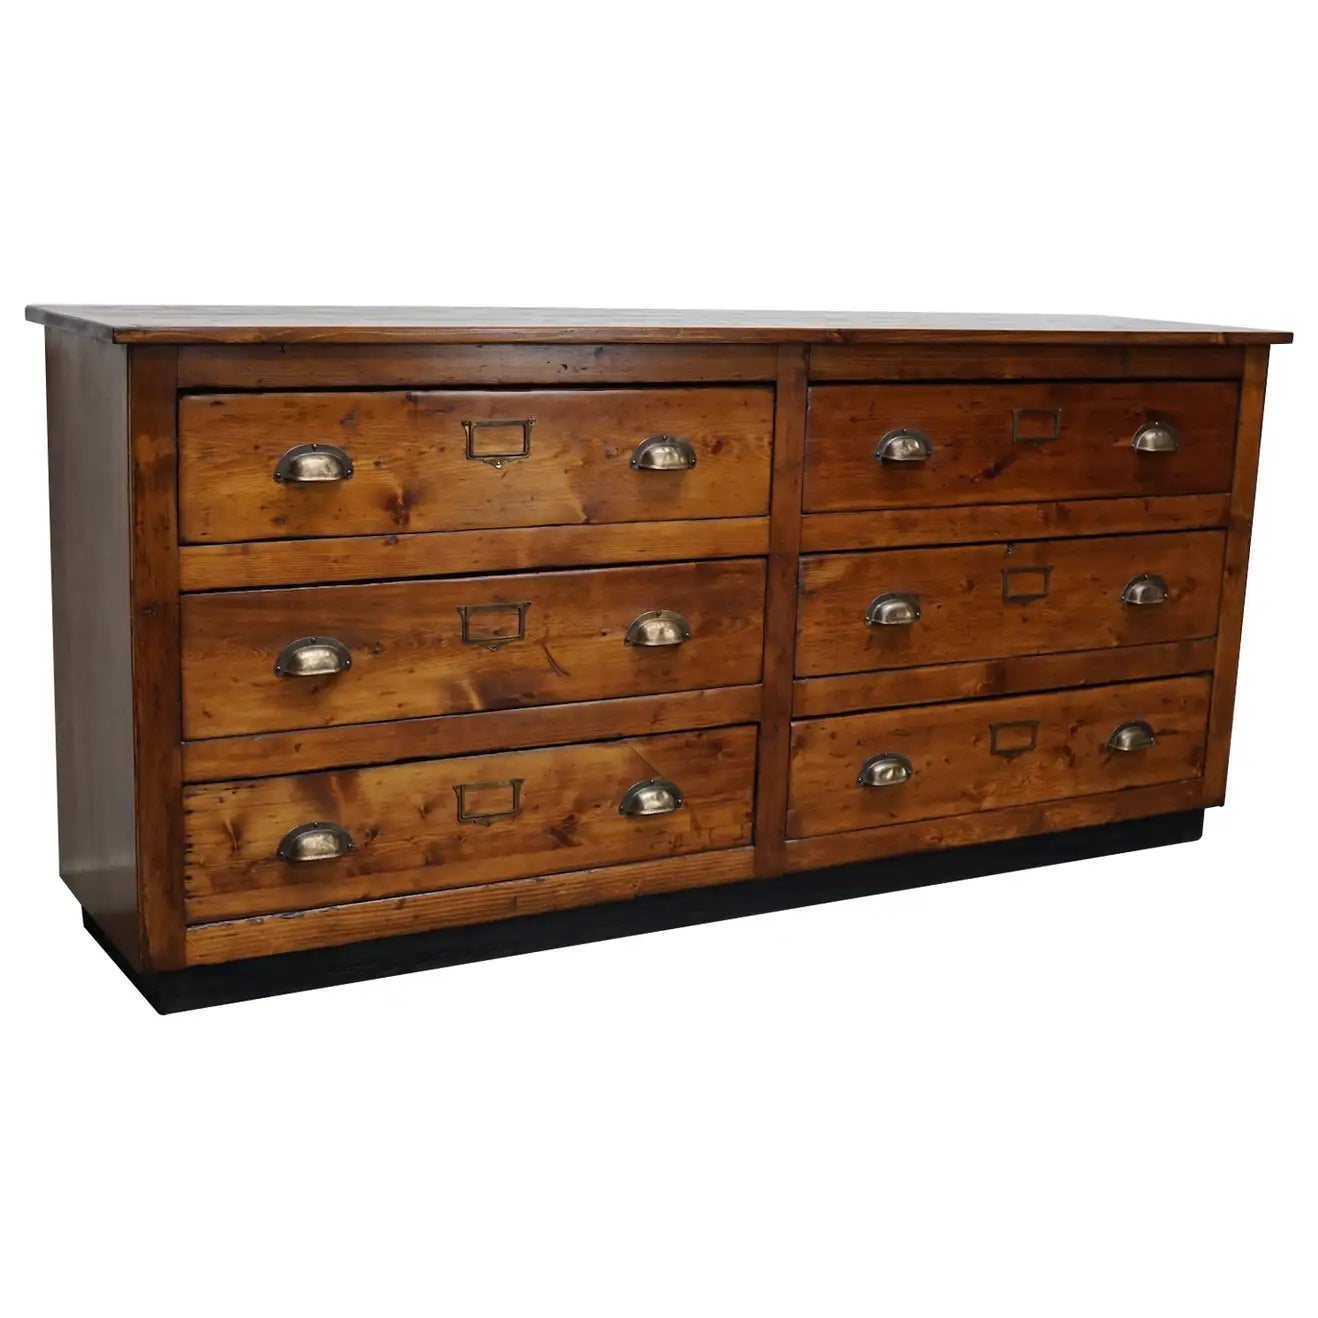 German Pine Apothecary Cabinet or Bank of Drawers, Mid-20th Century